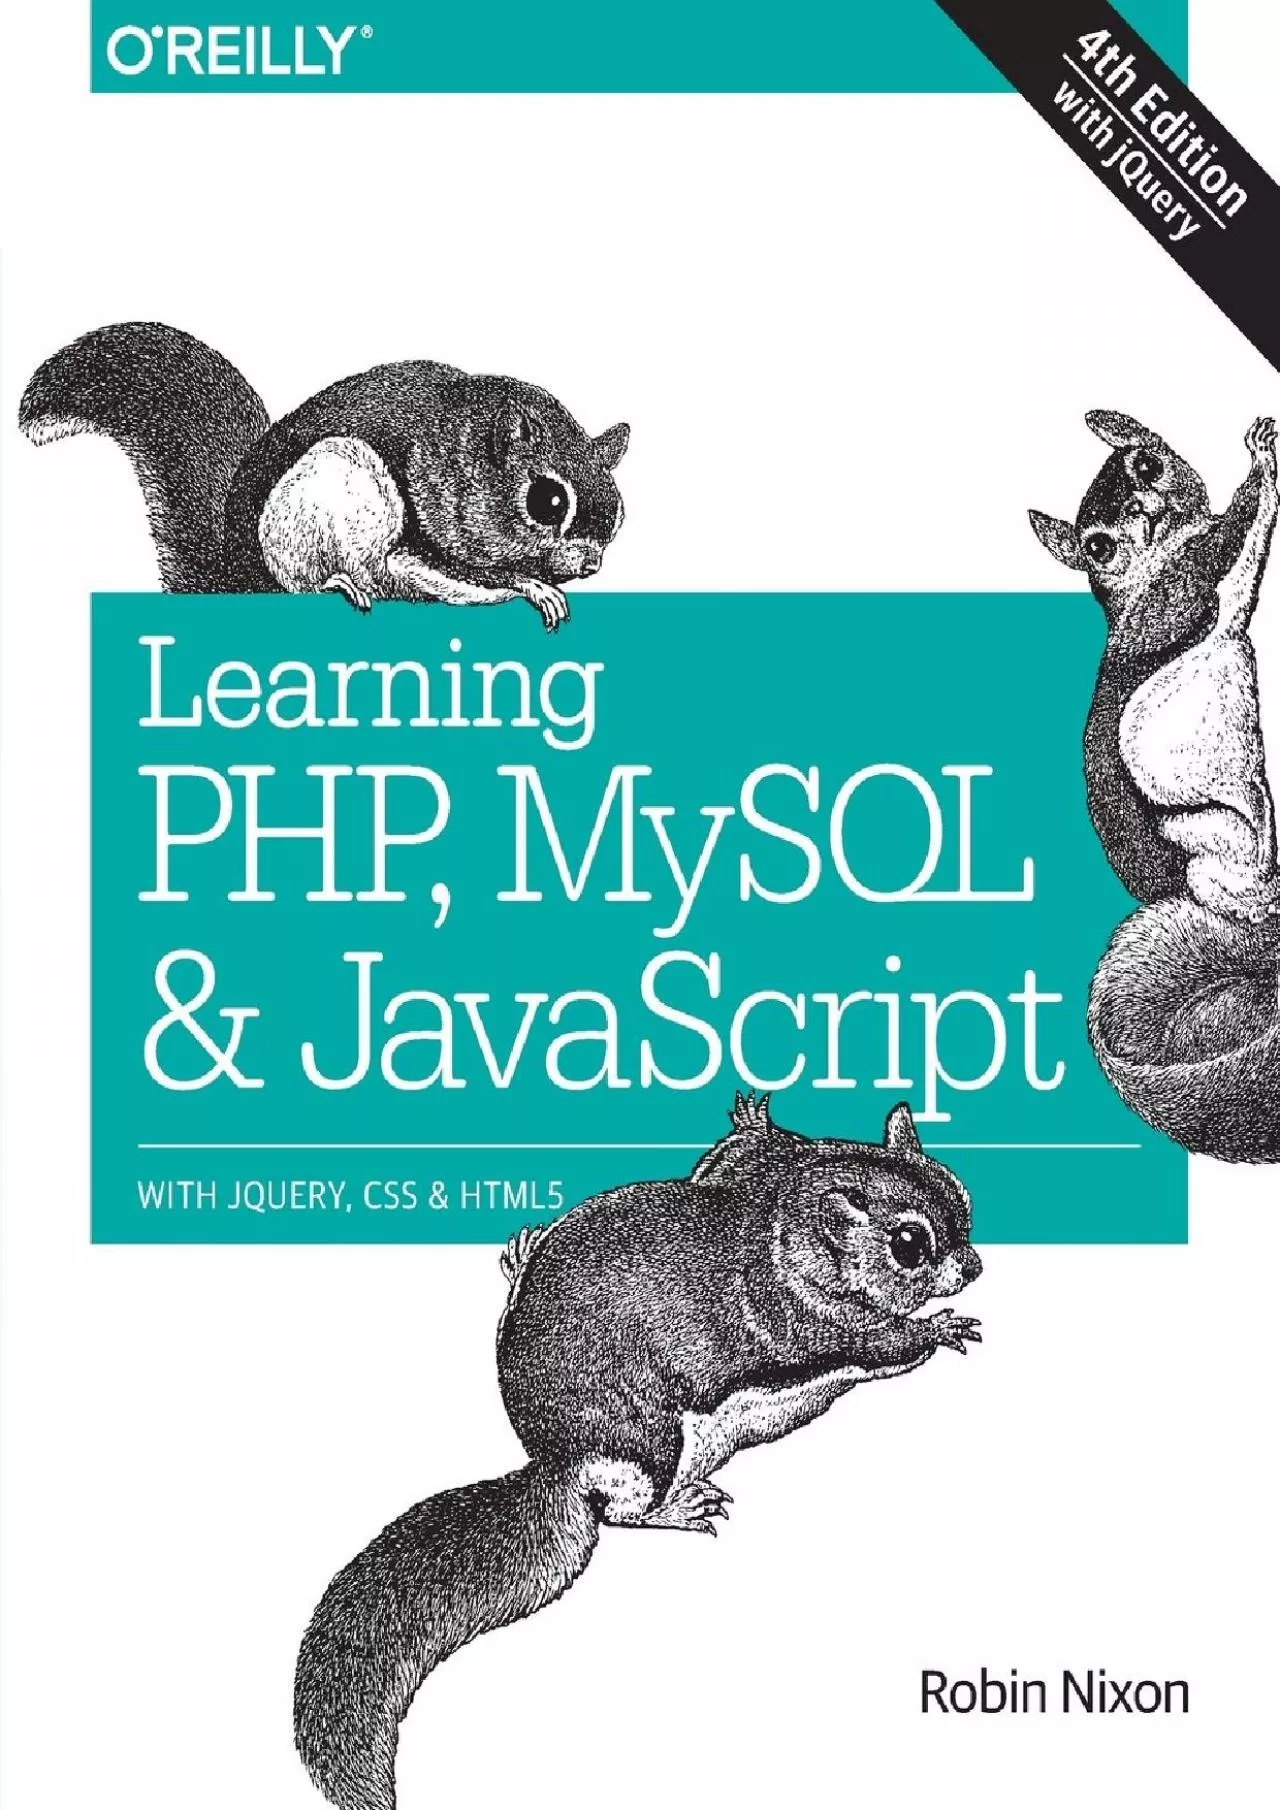 [READING BOOK]-Learning PHP, MySQL  JavaScript: With jQuery, CSS  HTML5 (Learning Php,